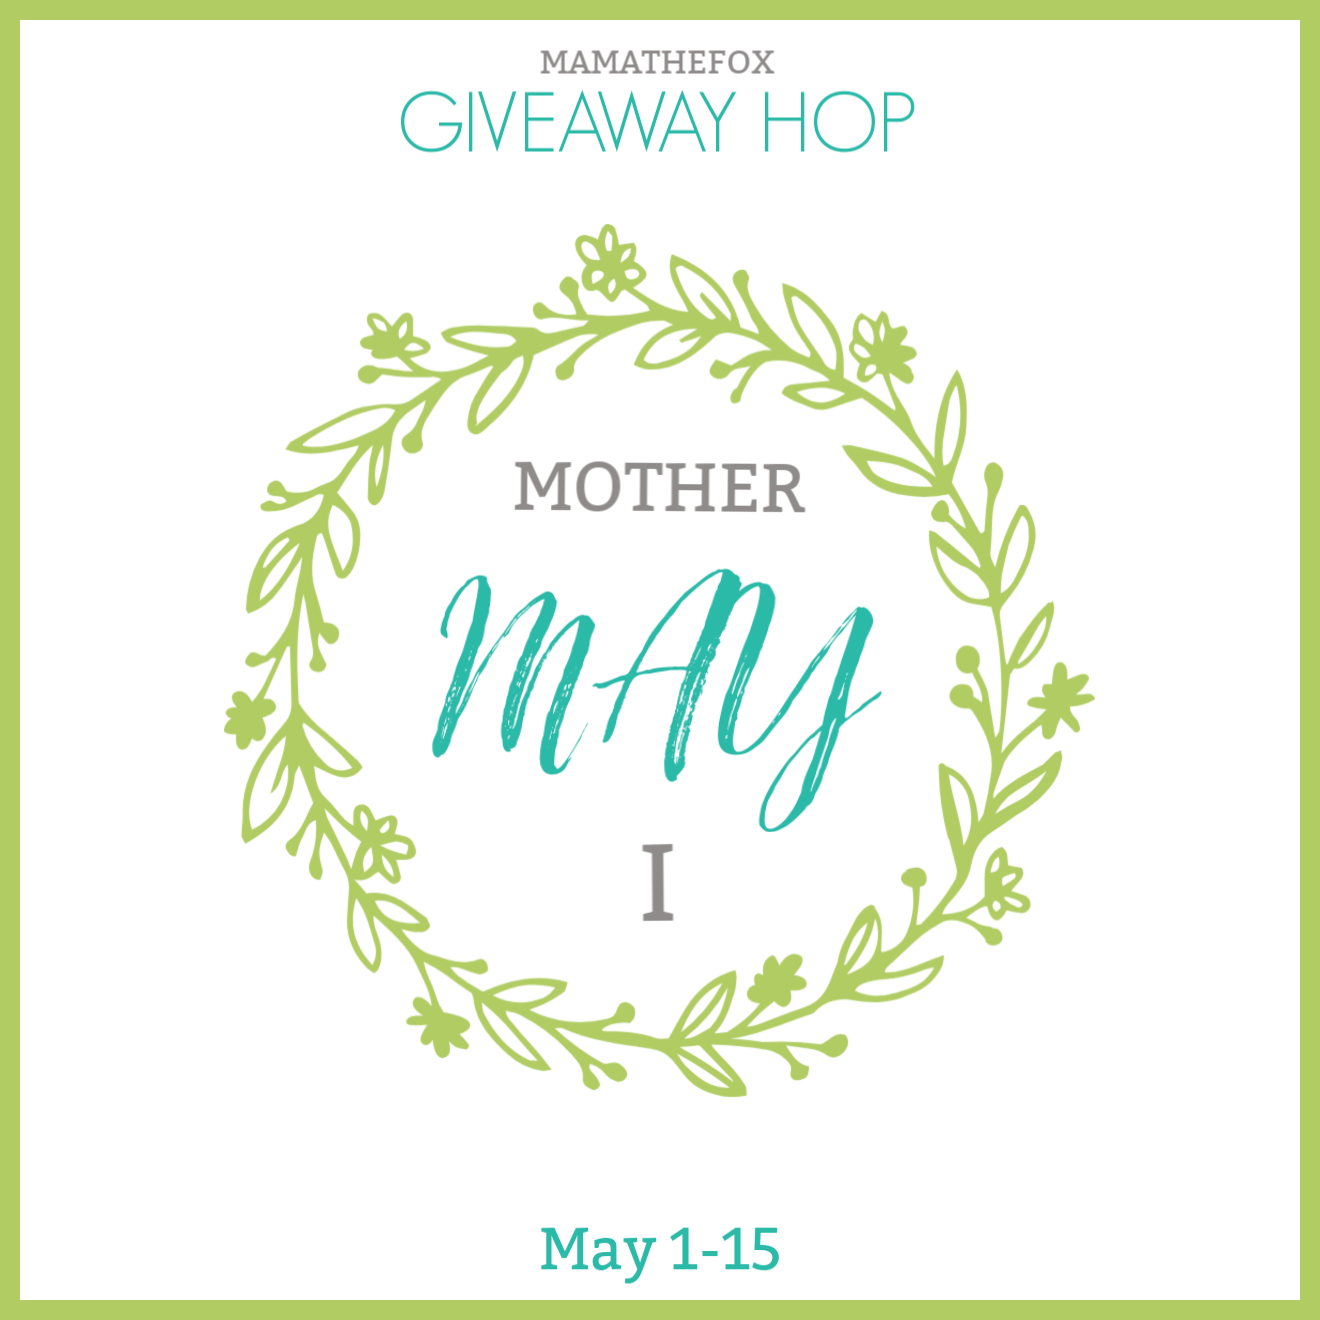 mother's day hop